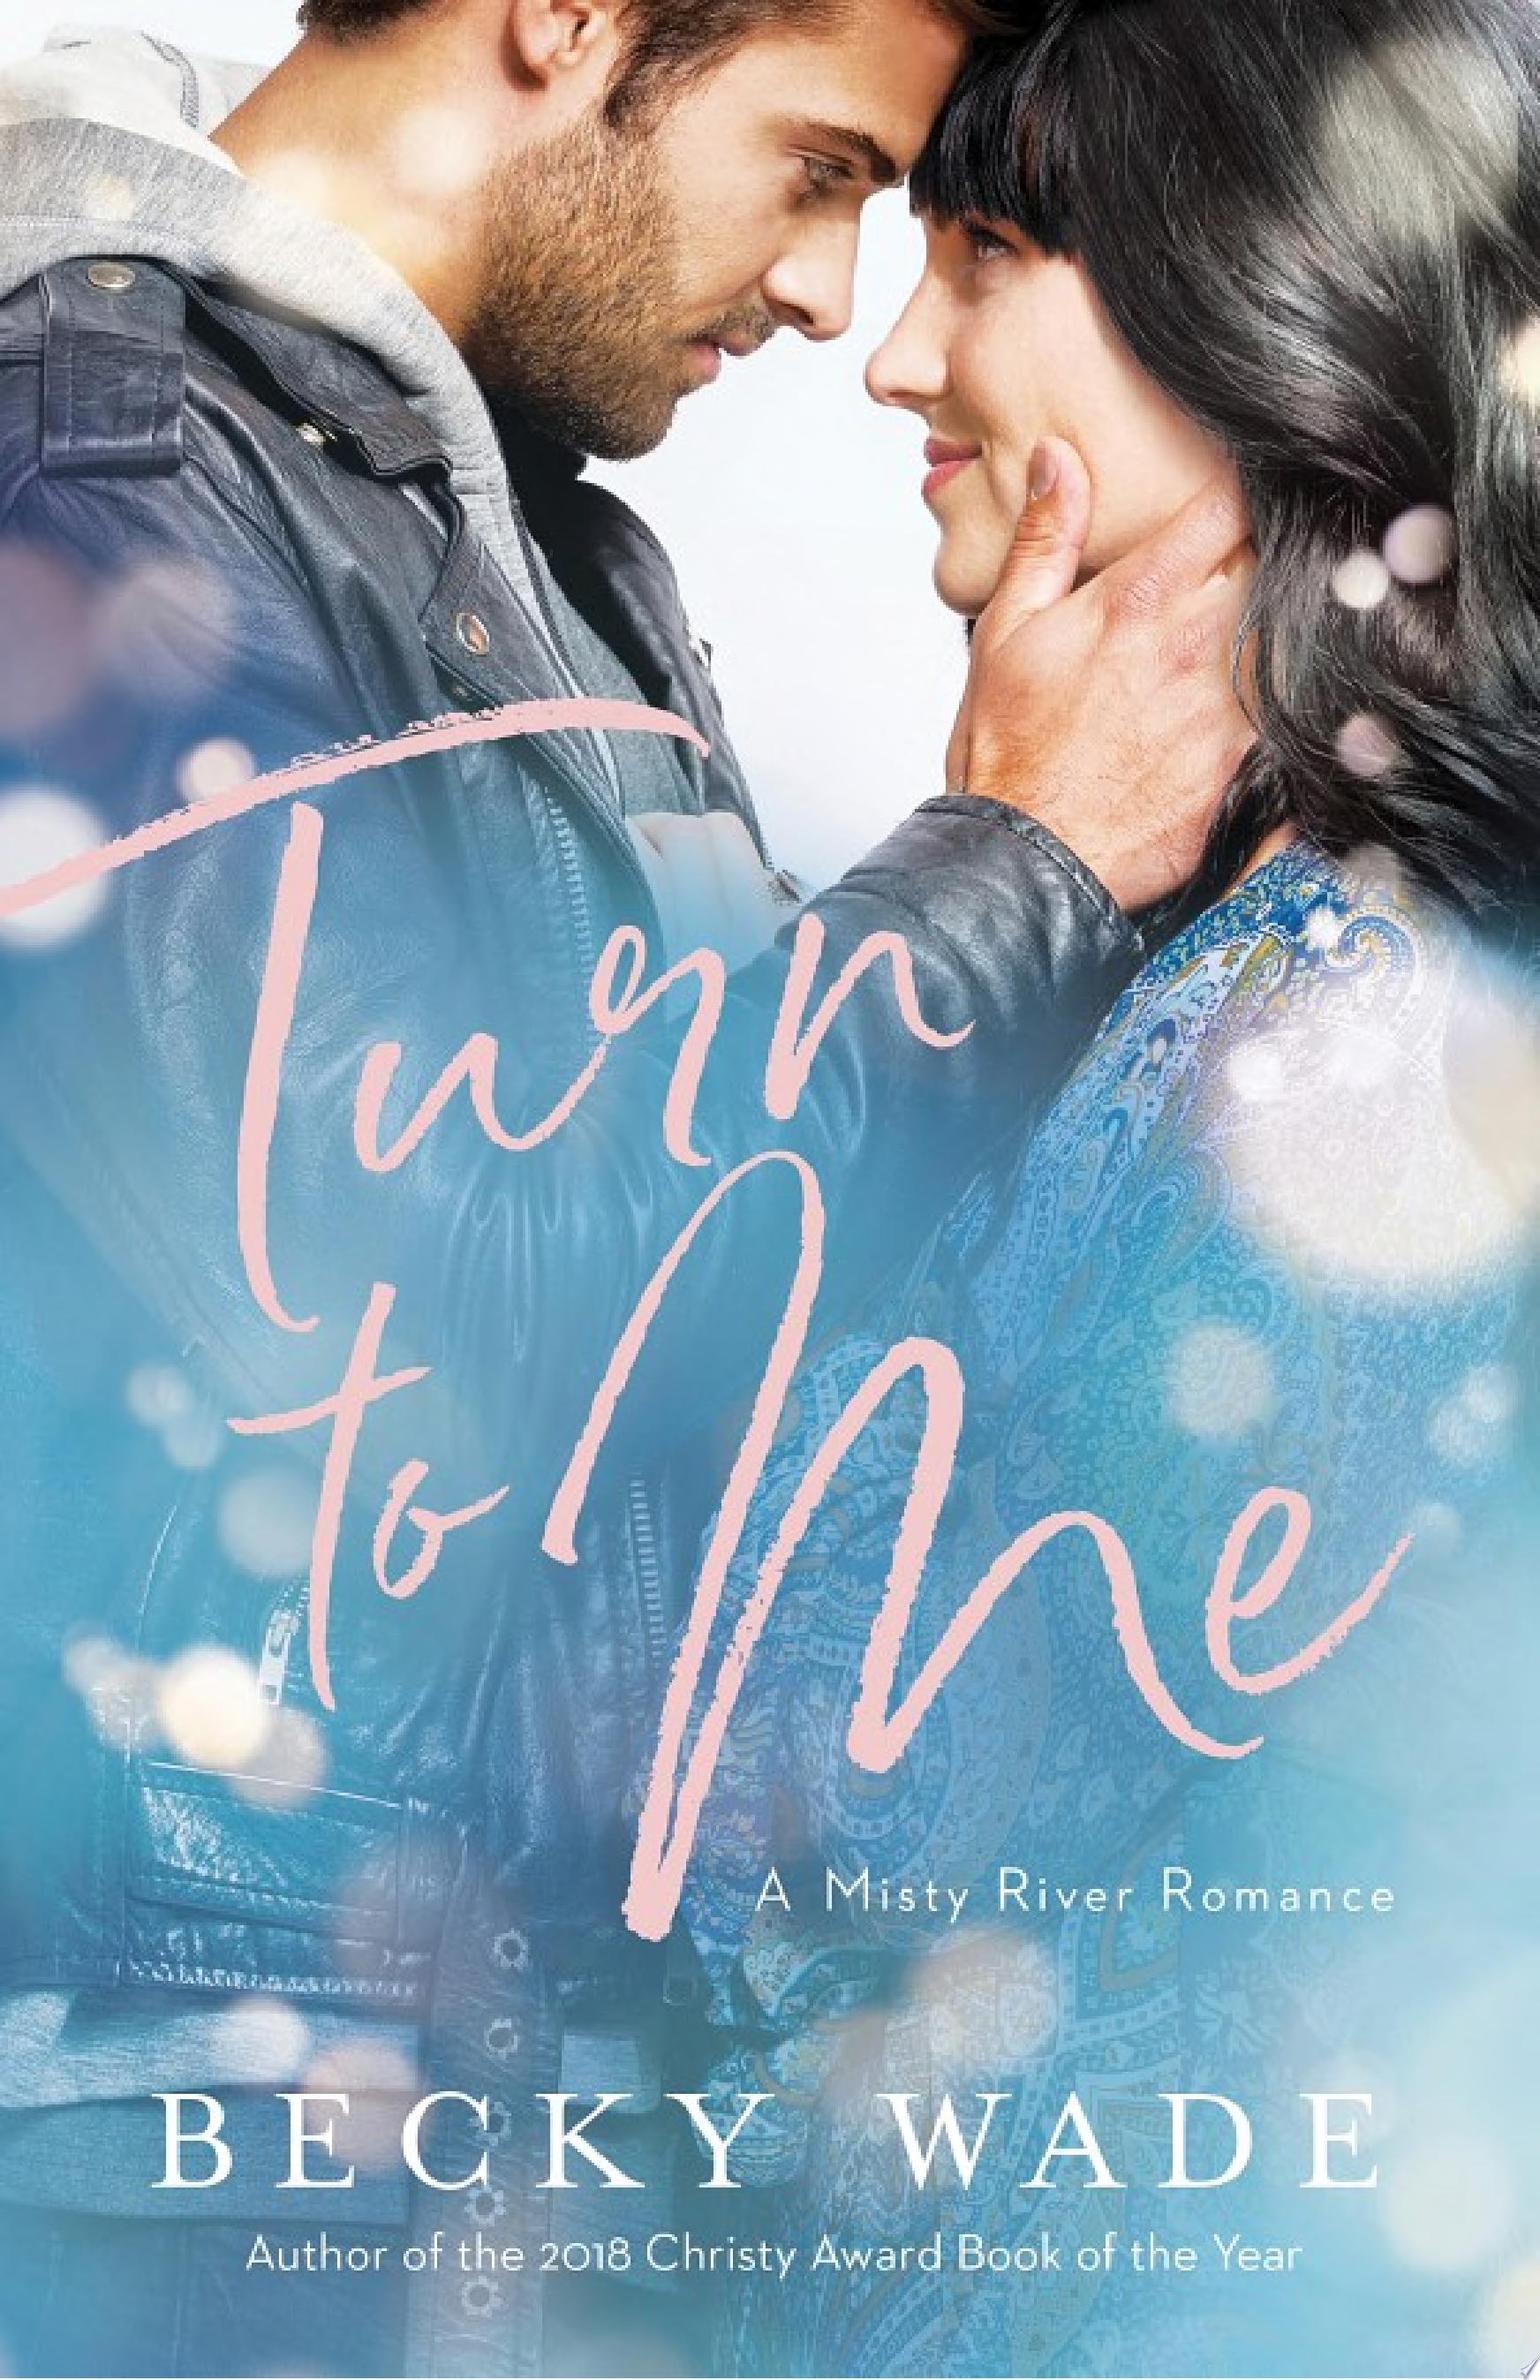 Image for "Turn to Me"